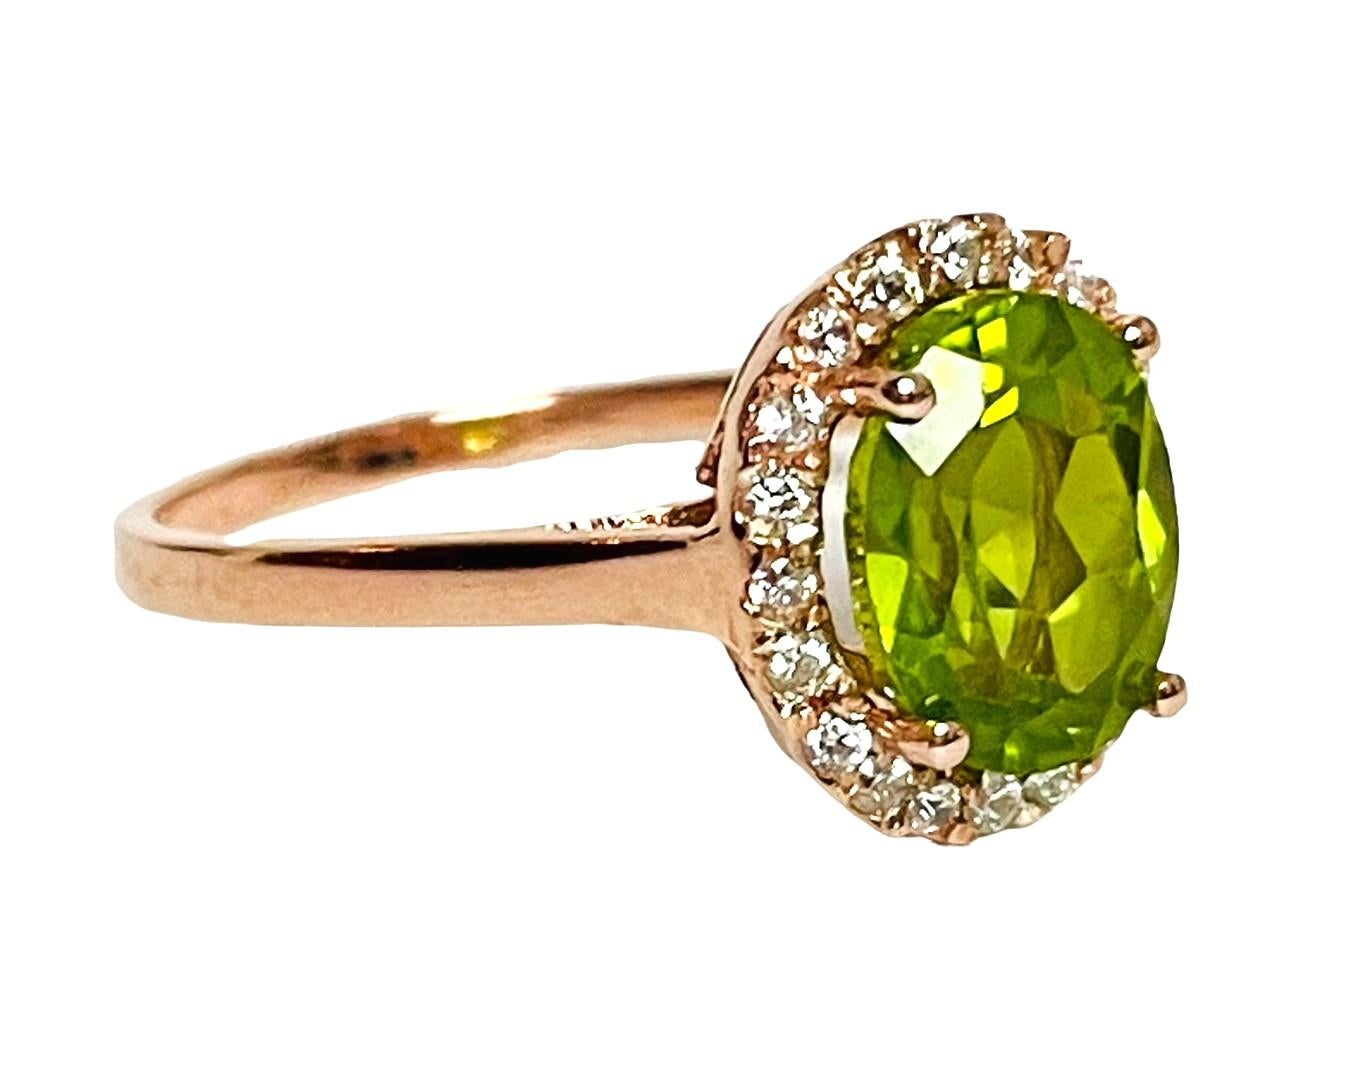 Women's New Natural Aaa Green Peridot Oval & White Cz Sterling 925 Silver Ring